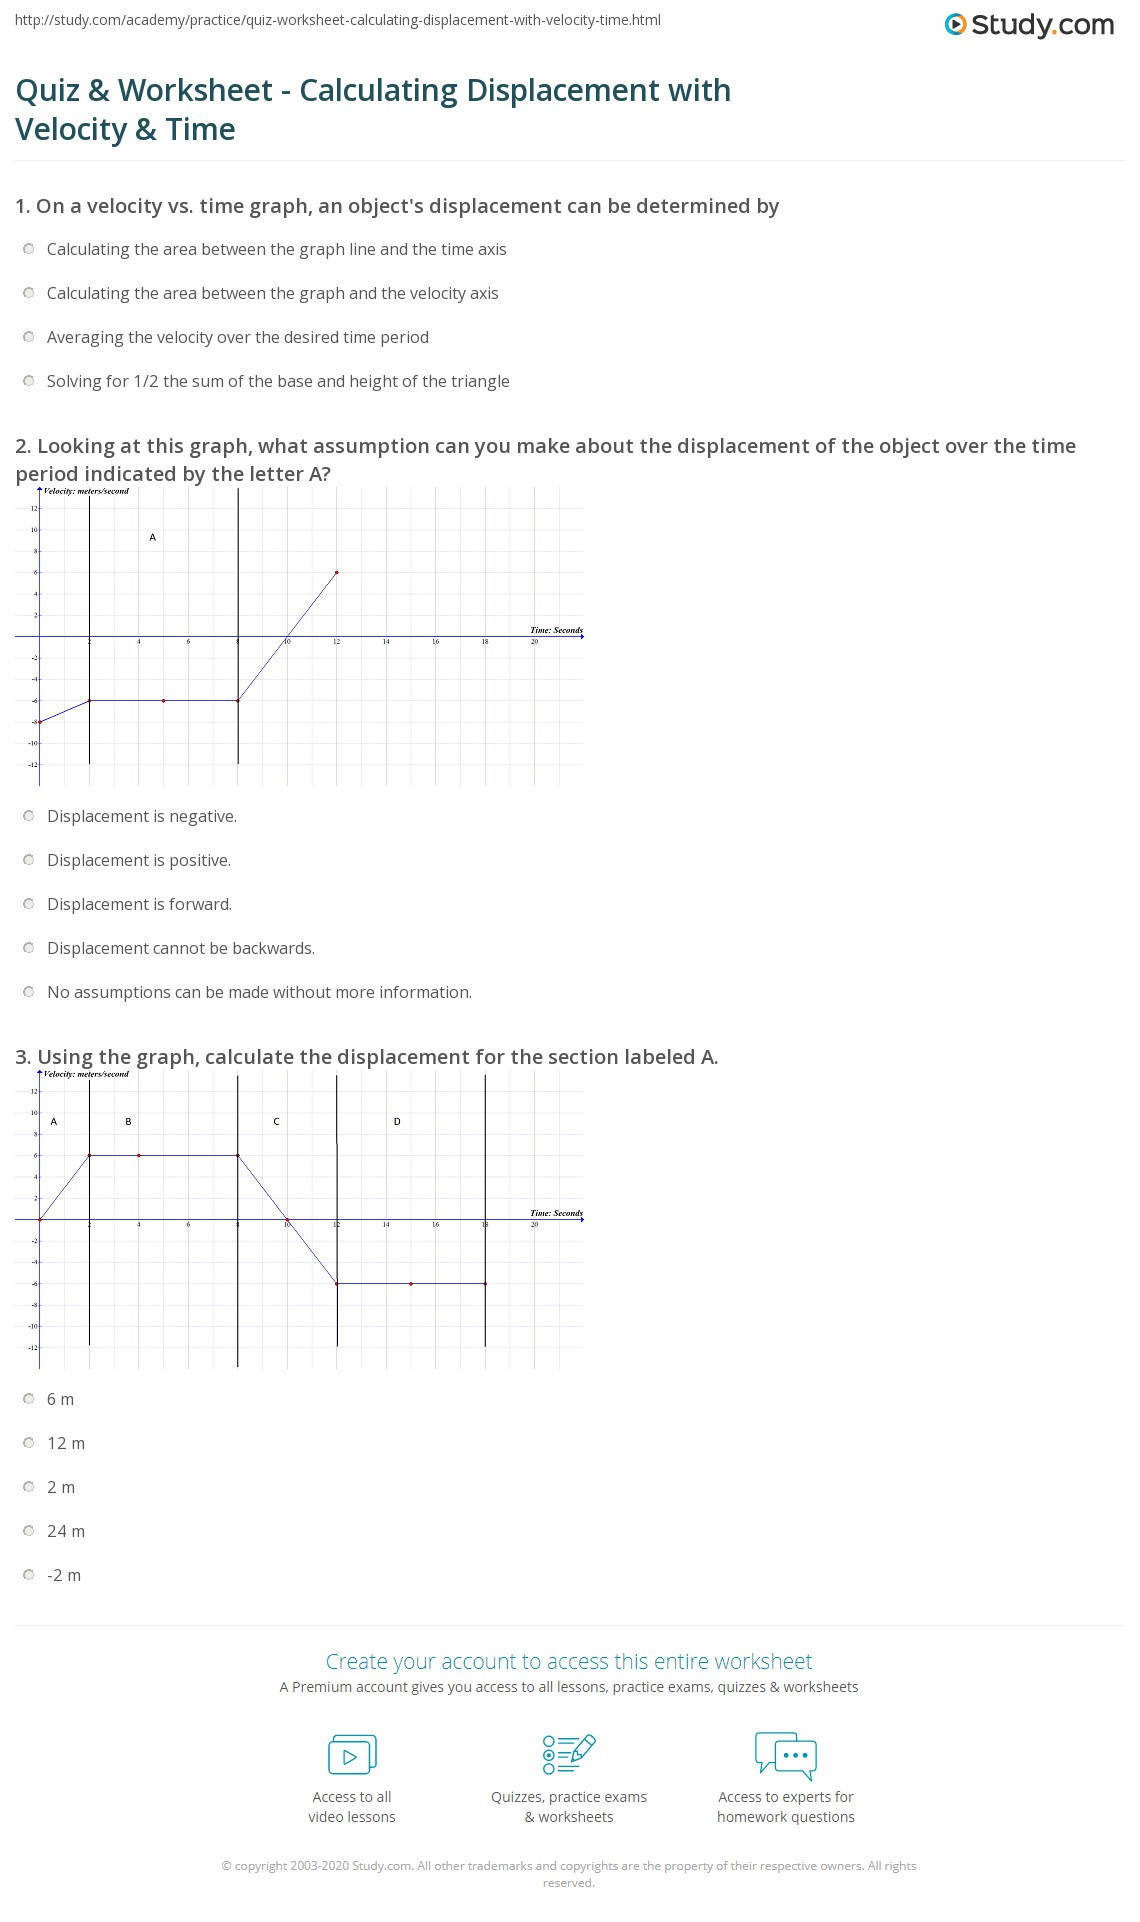 Velocity Time Graph Worksheet Quiz &amp; Worksheet Calculating Displacement with Velocity